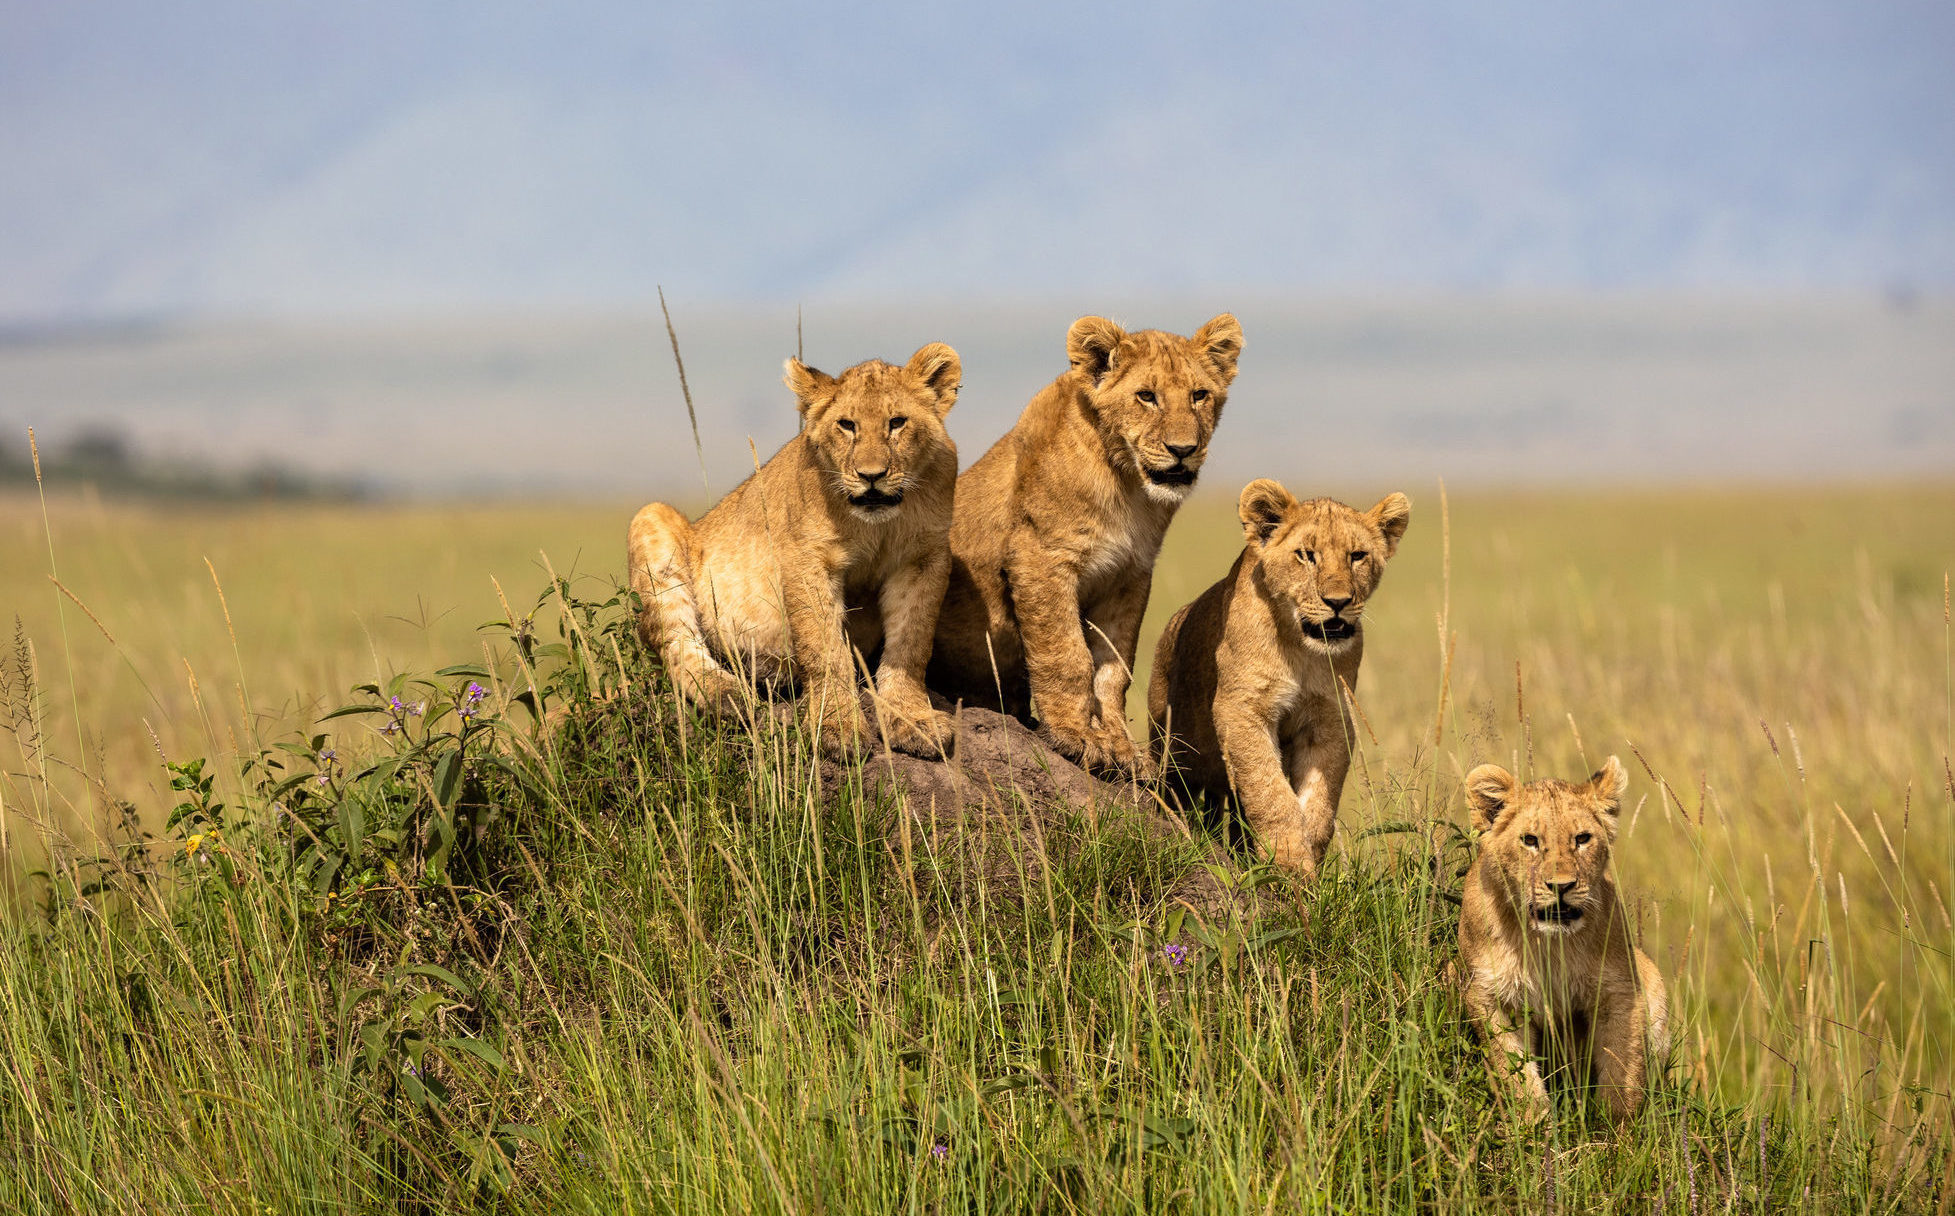 Witness extraordinary Kenyan wildlife like these lion cubs when you take a tailor-made holiday with Alfred&.